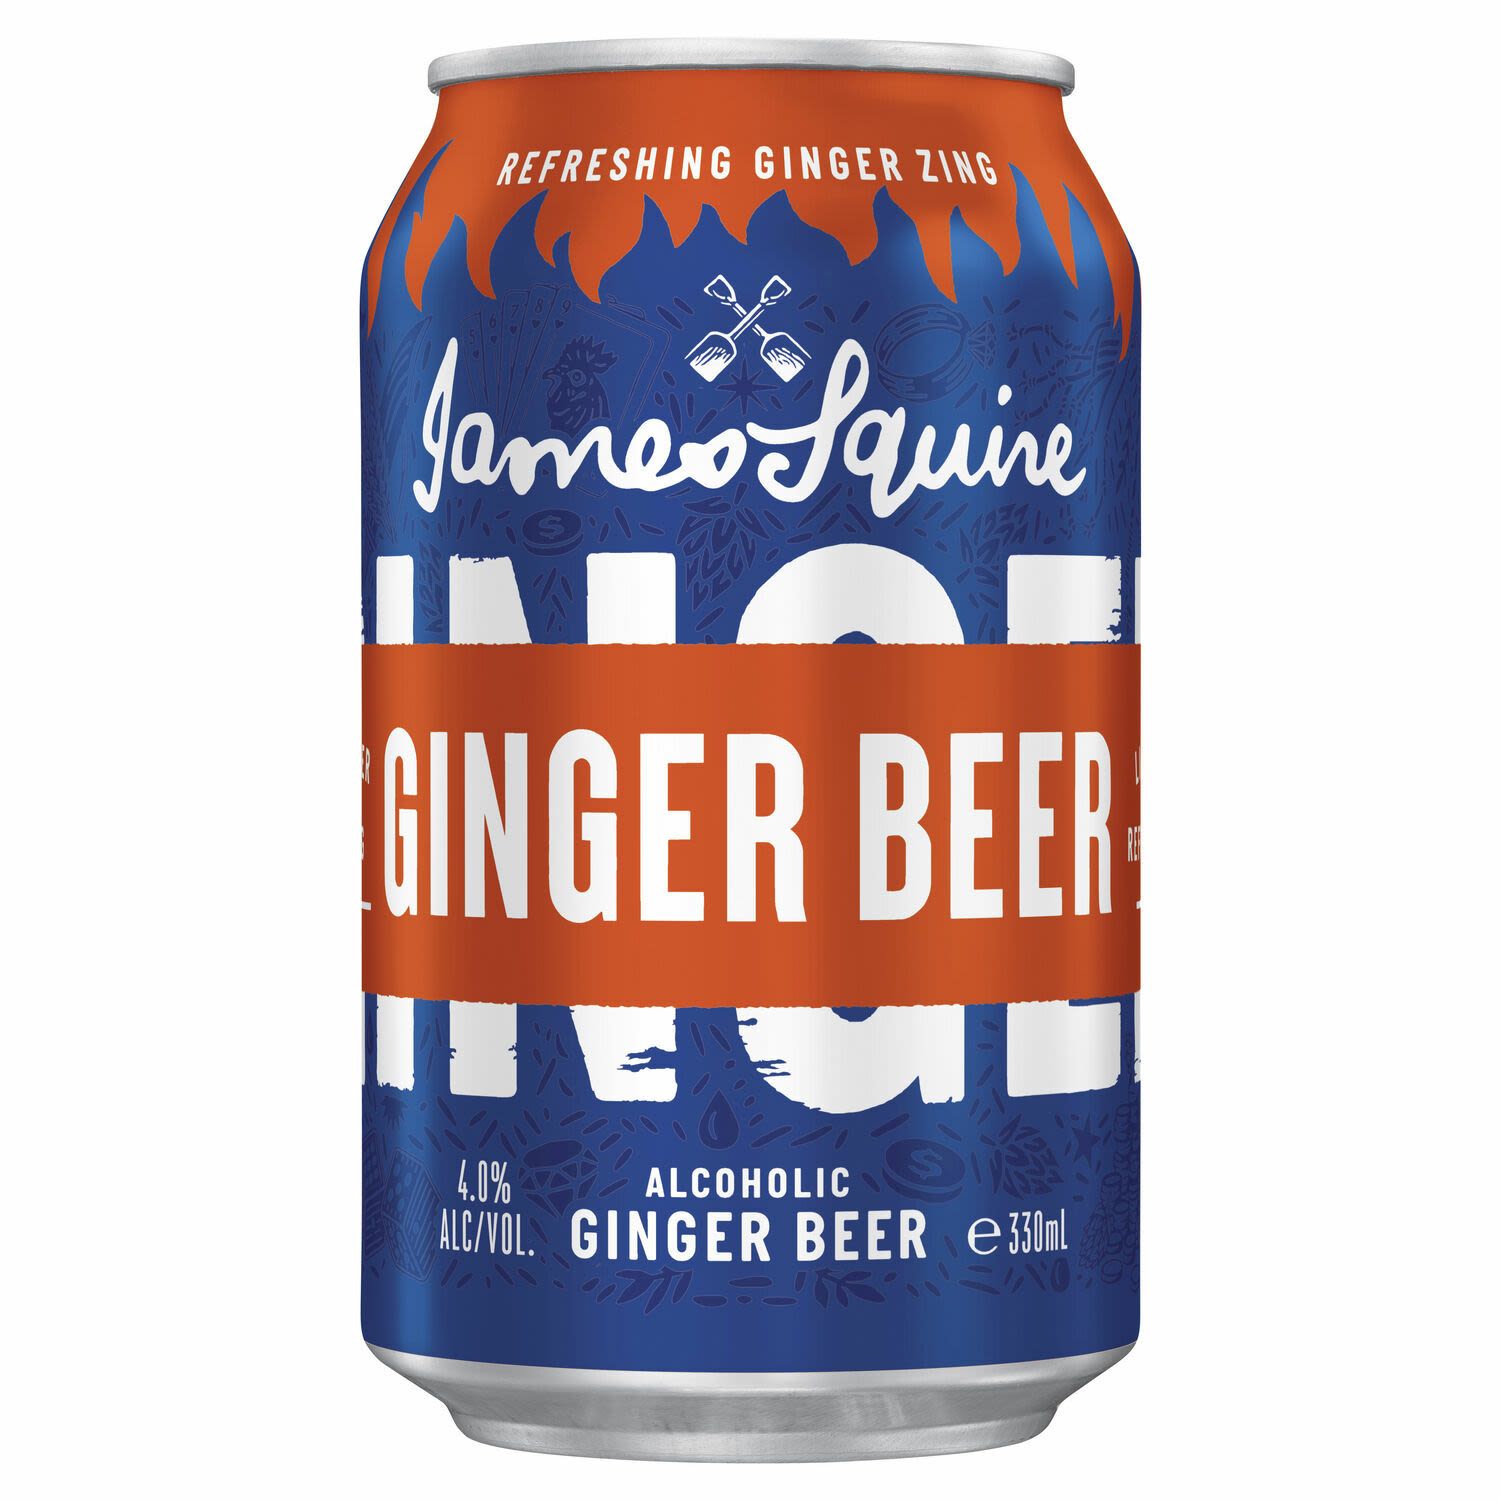 James Squire Ginger Beer has been carefully crafted with Australian ginger for a light, refreshing and zingy ginger taste. It can be enjoyed straight from the can or over ice with fresh lime.<br /> <br />Alcohol Volume: 4.00%<br /><br />Pack Format: Can<br /><br />Standard Drinks: 1</br /><br />Pack Type: Can<br /><br />Country of Origin: Australia<br />